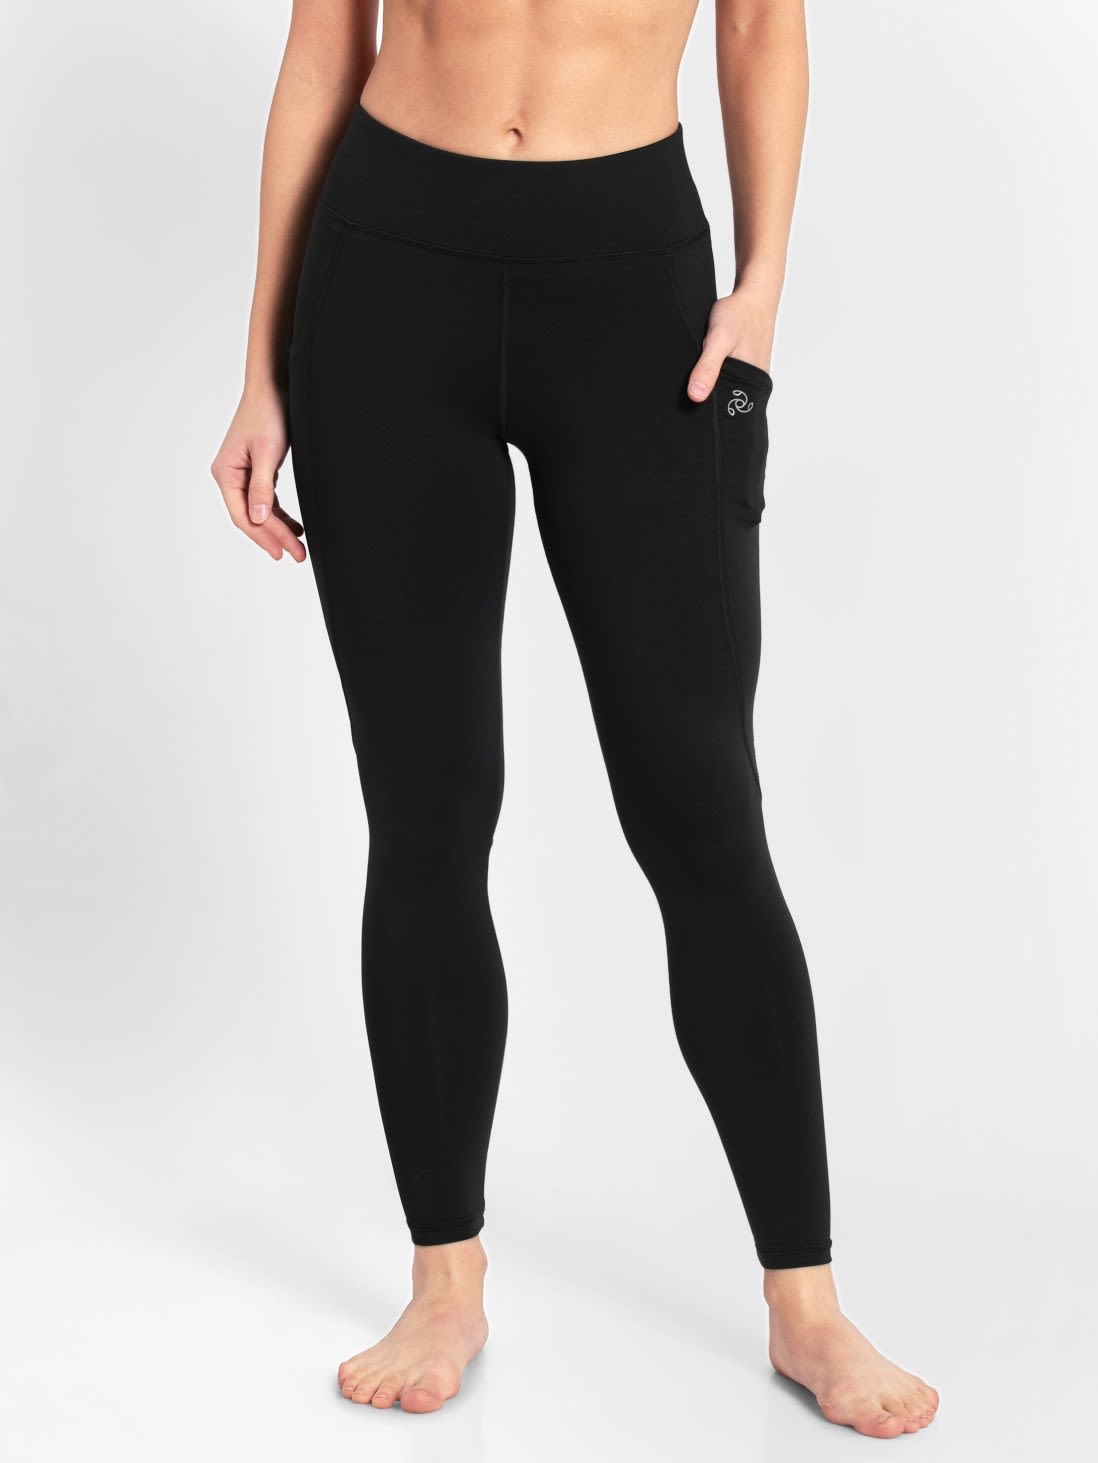 Buy Black Leggings With Pocket And Elasticated Waistband For Women Mw12 2921